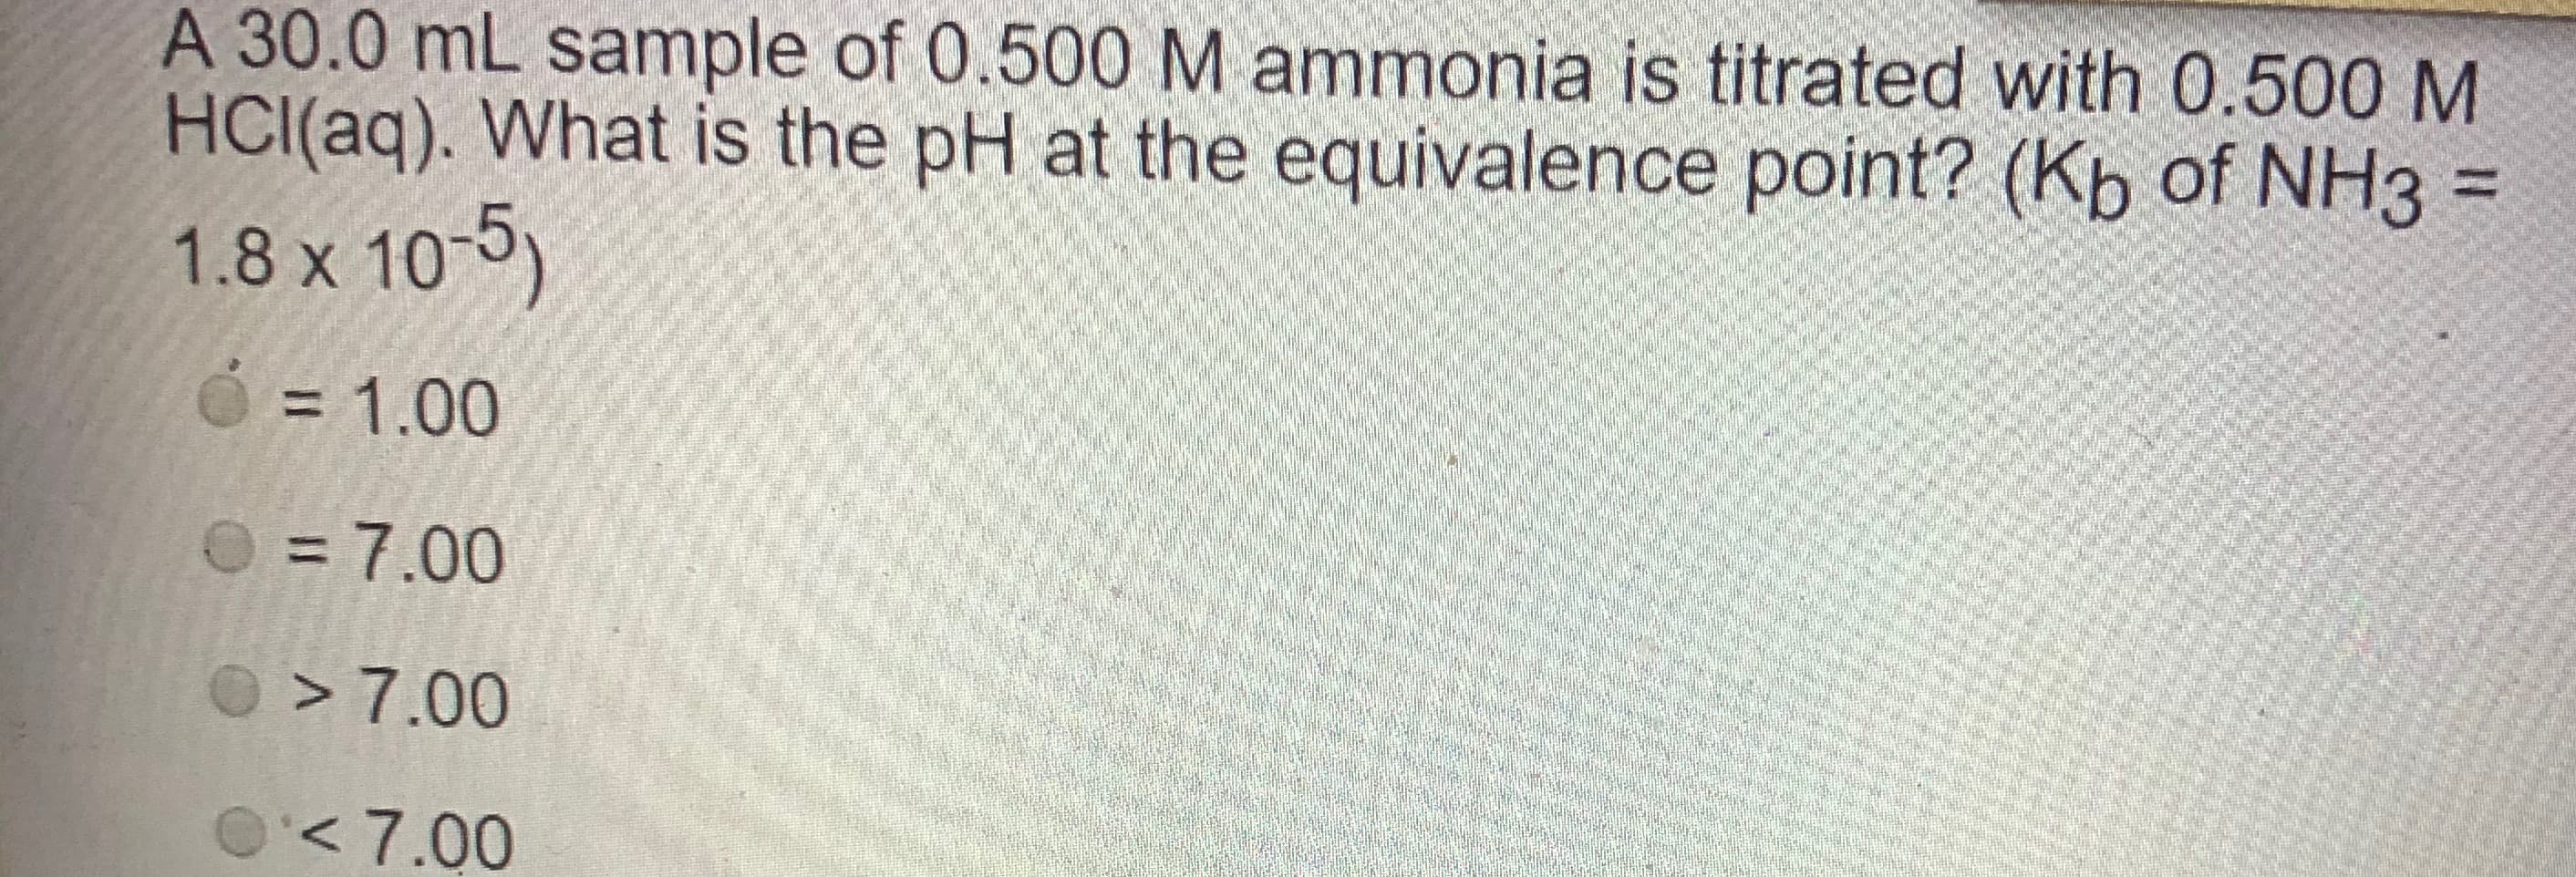 What is the pH at the equivalence point?
